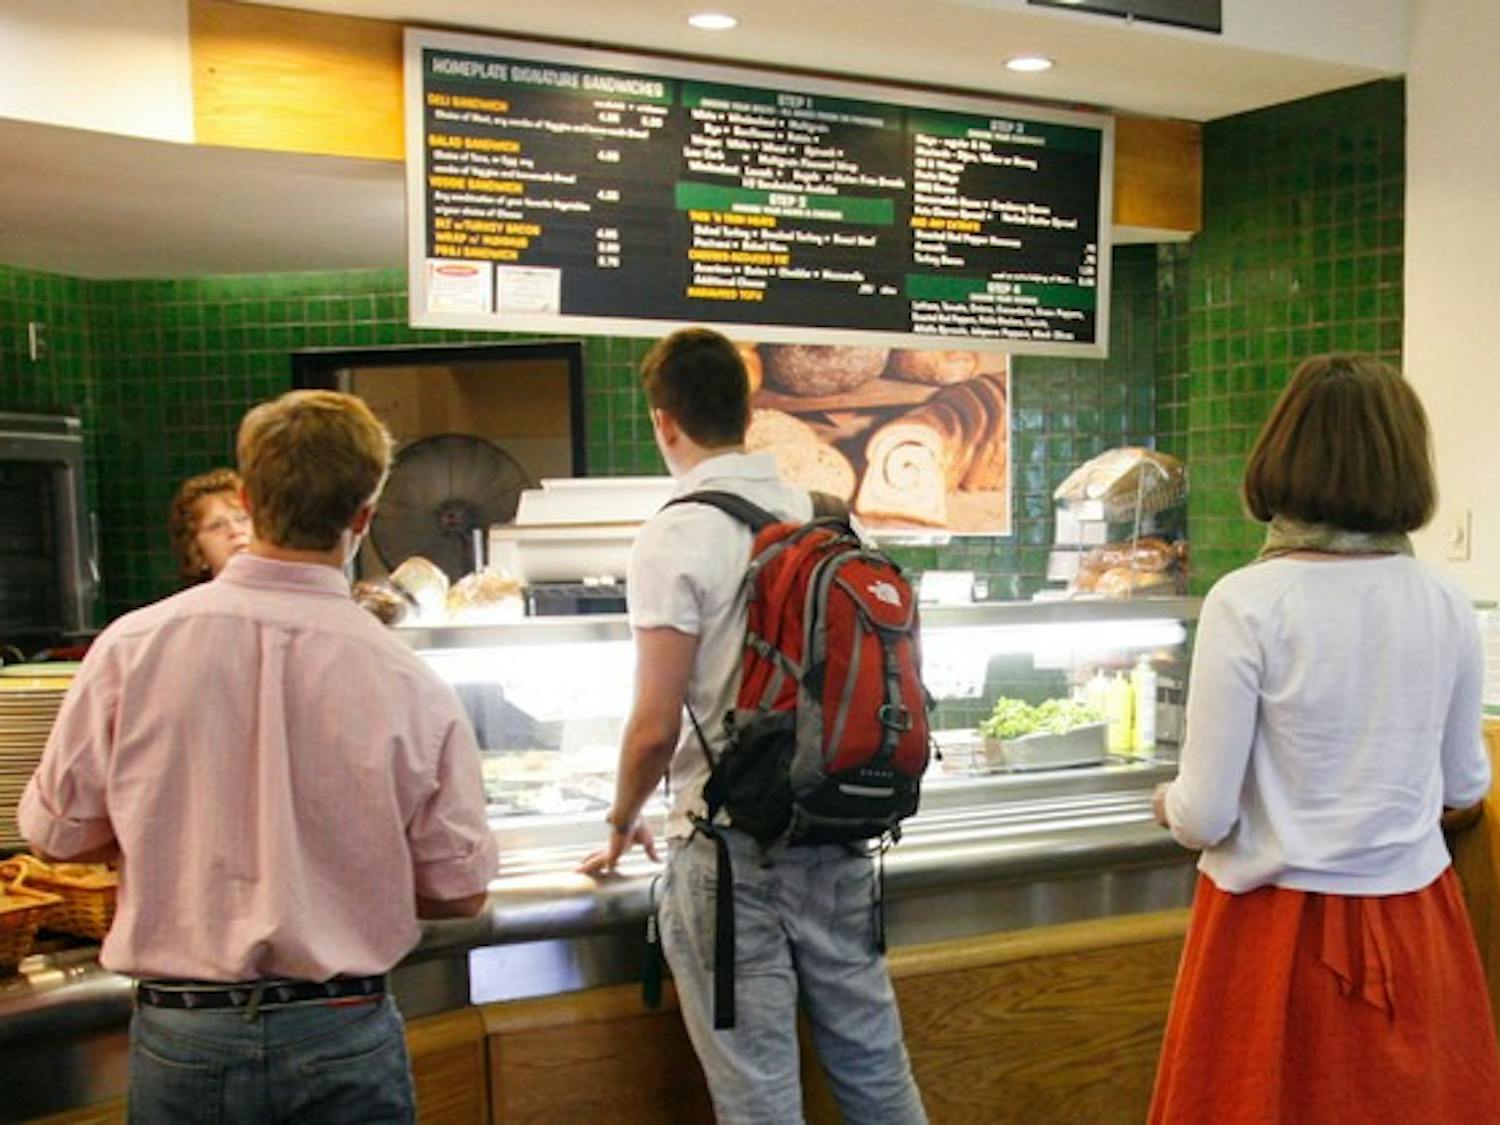 Dartmouth Dining Services reviews menu prices every summer.